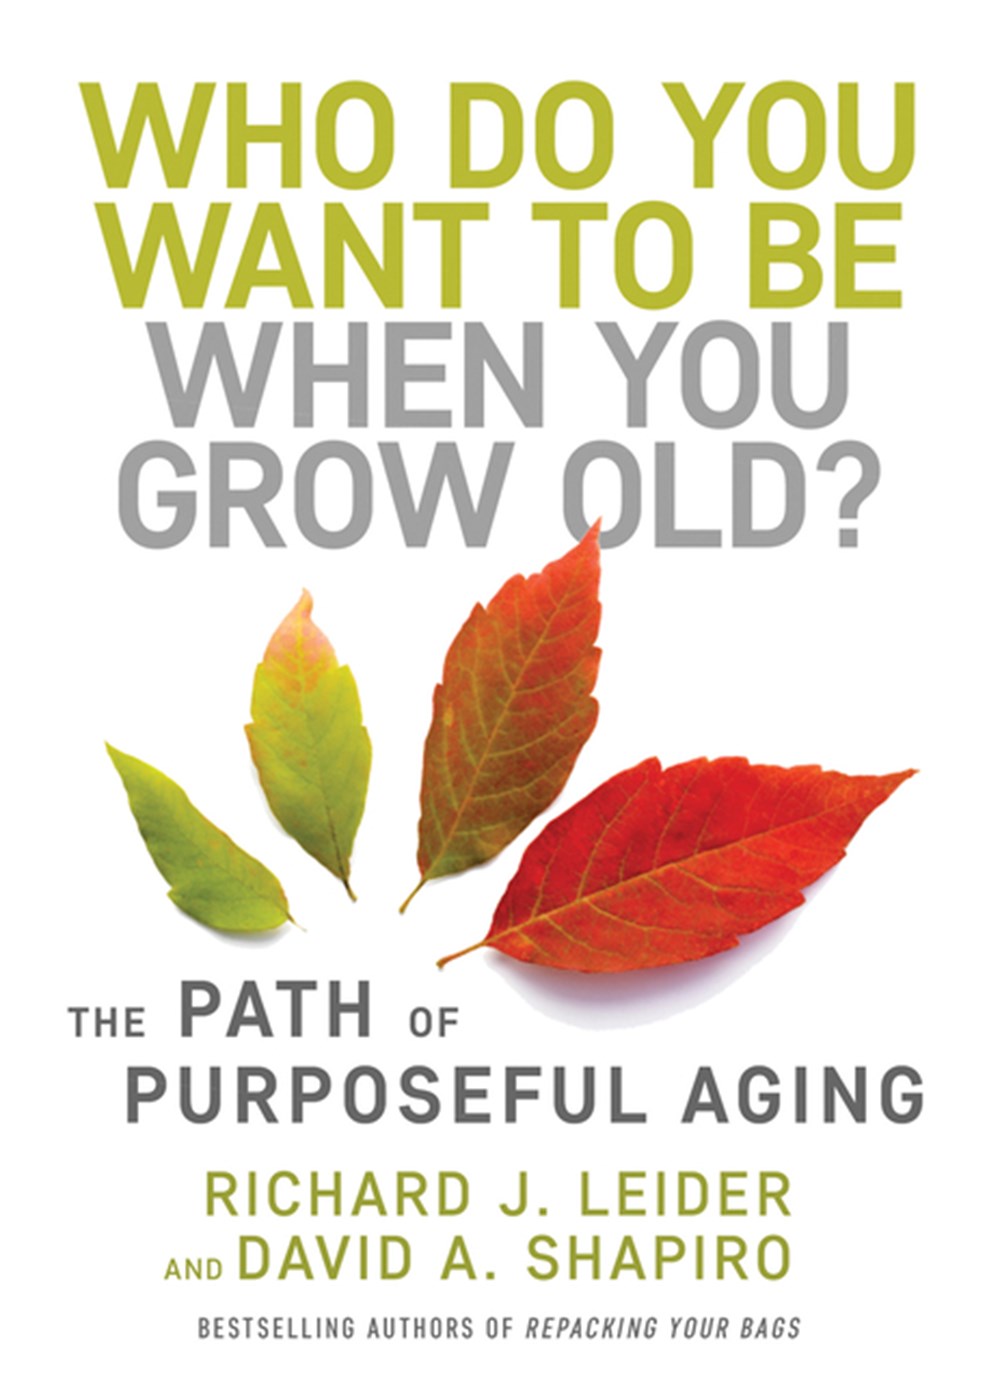 Who Do You Want to Be When You Grow Old? The Path of Purposeful Aging